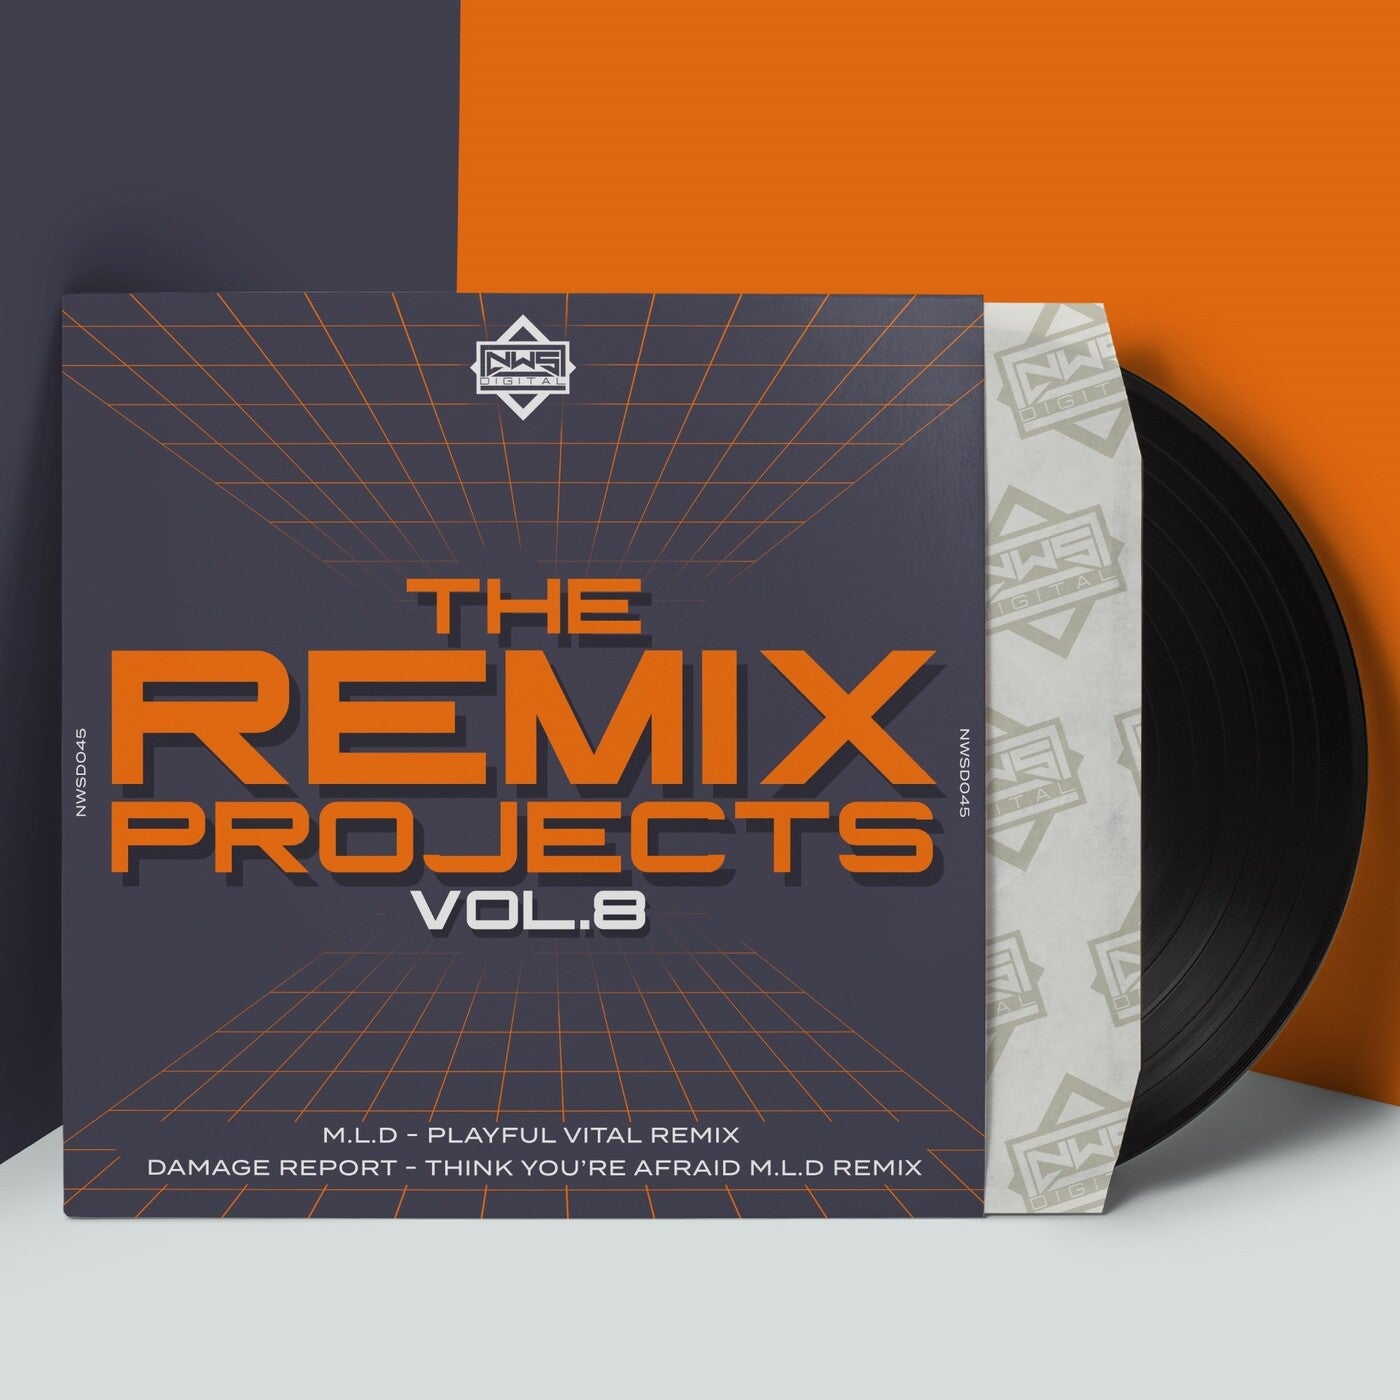 The Remix Projects Vol 8